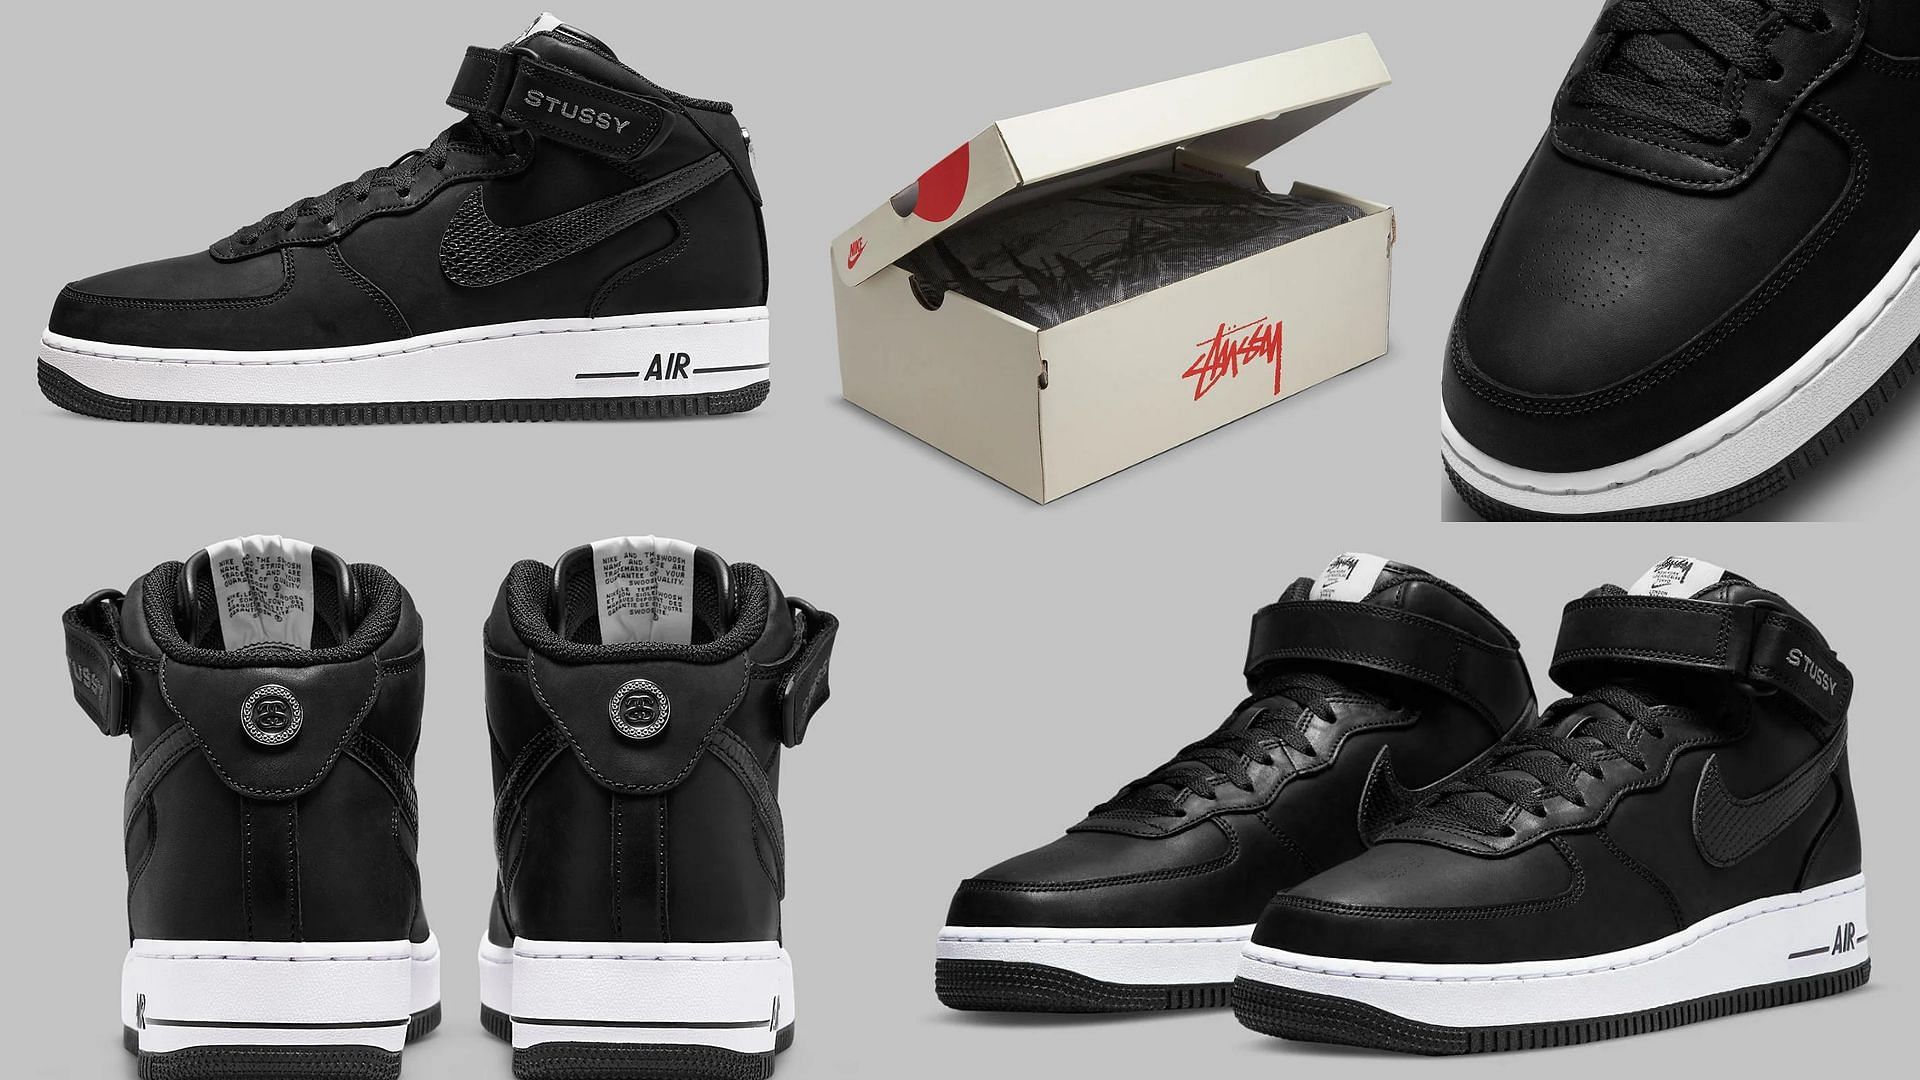 Stussy's Sold-Out Nike Air Force 1 Is Releasing Again